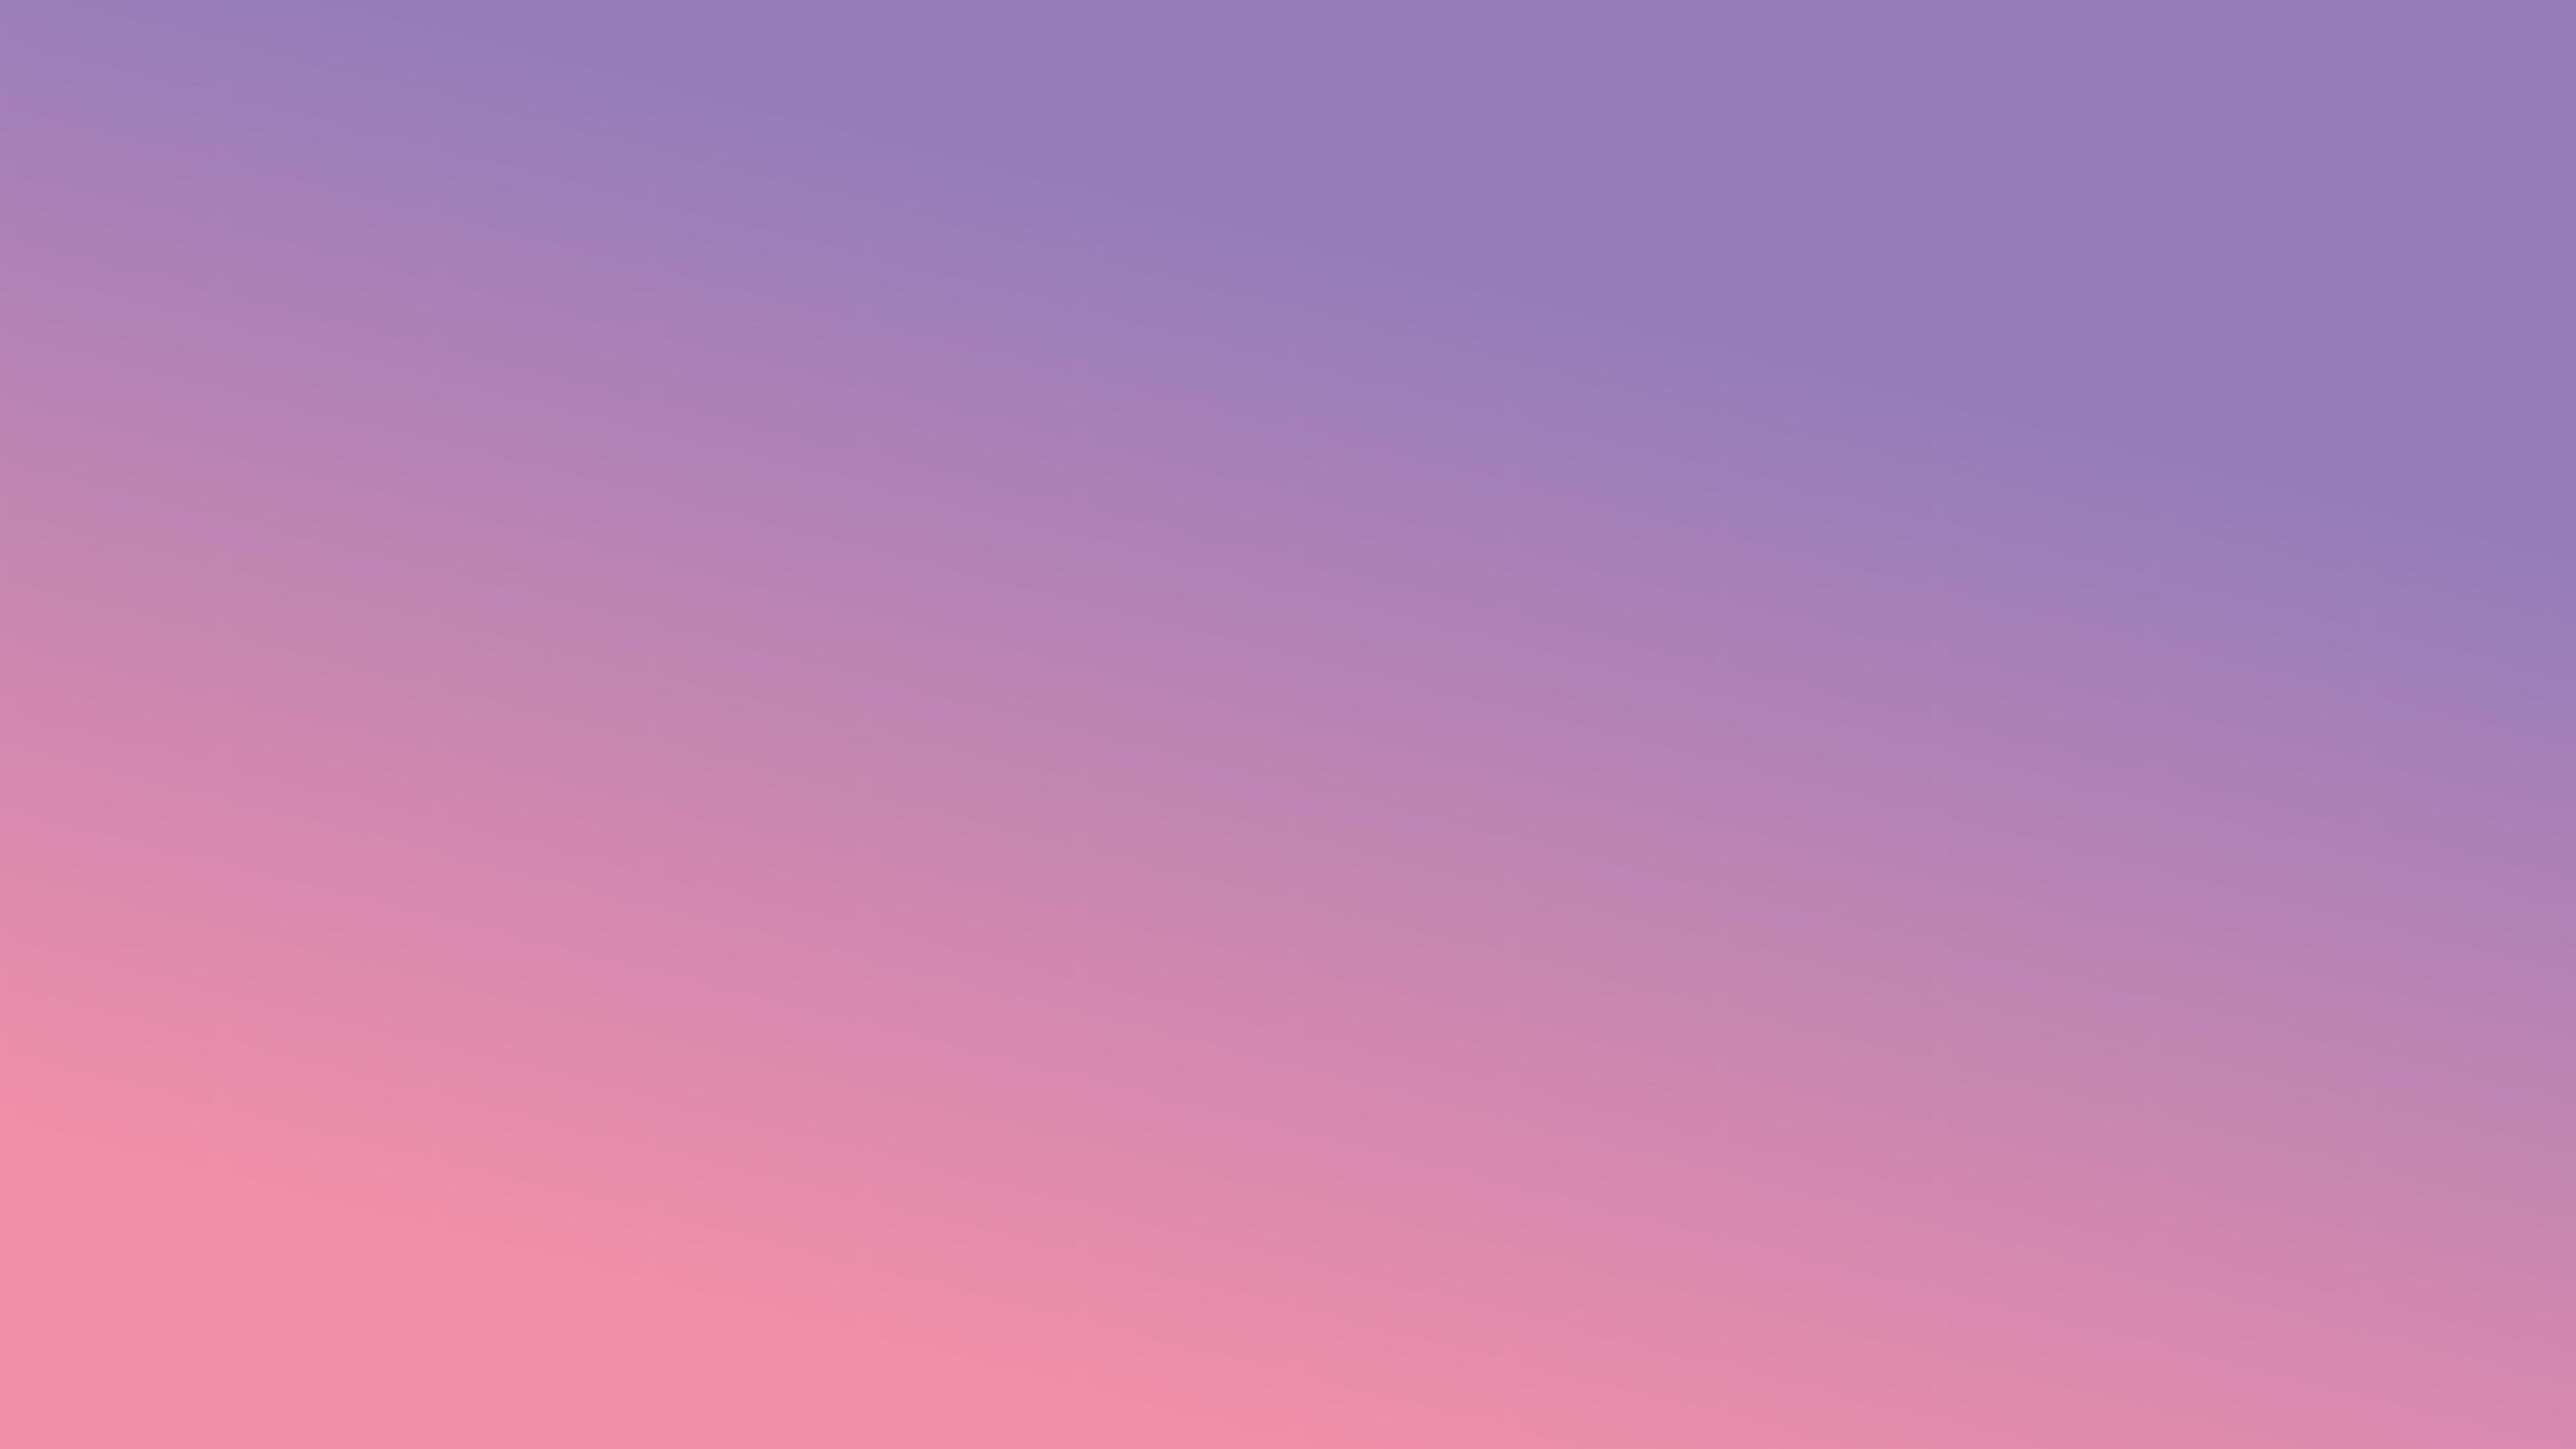 A pink and purple background with some clouds - Purple quotes, light pink, profile picture